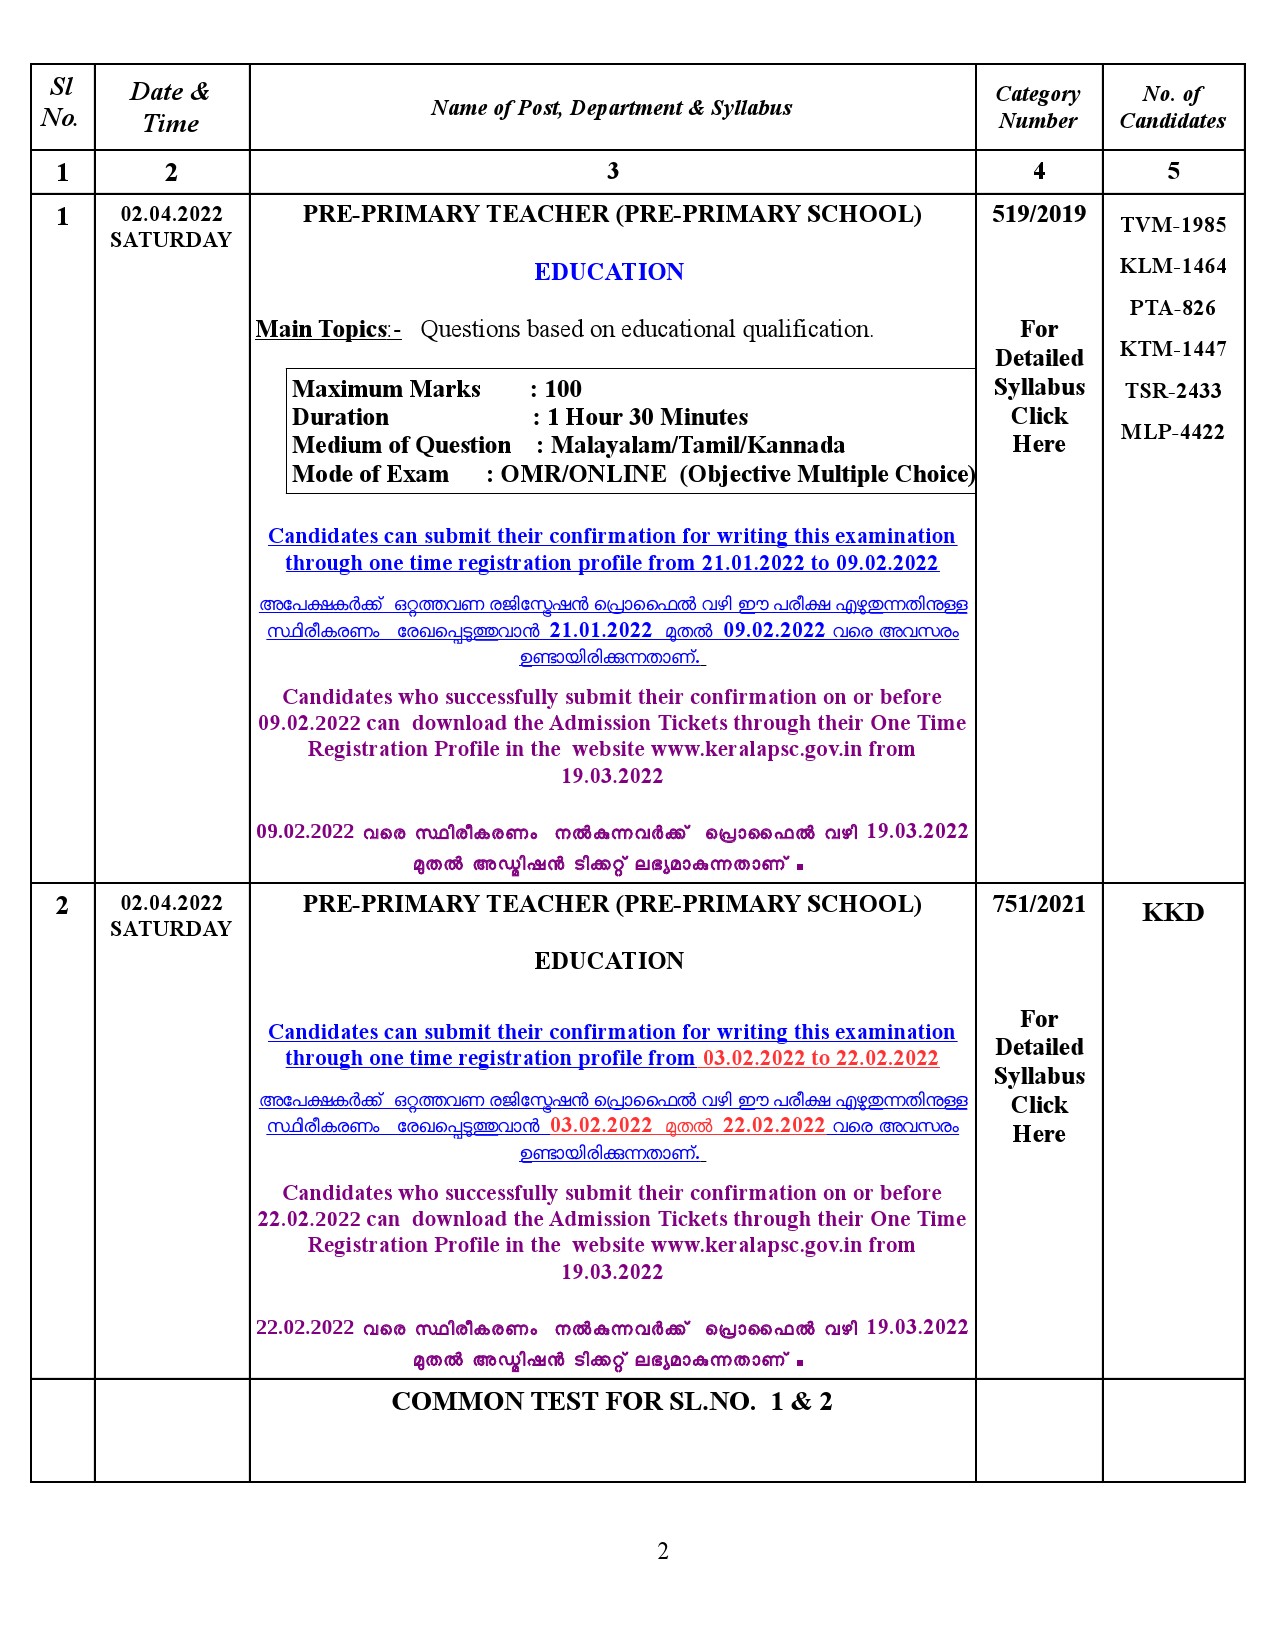 Examination Programme For The Month Of April 2022 - Notification Image 2